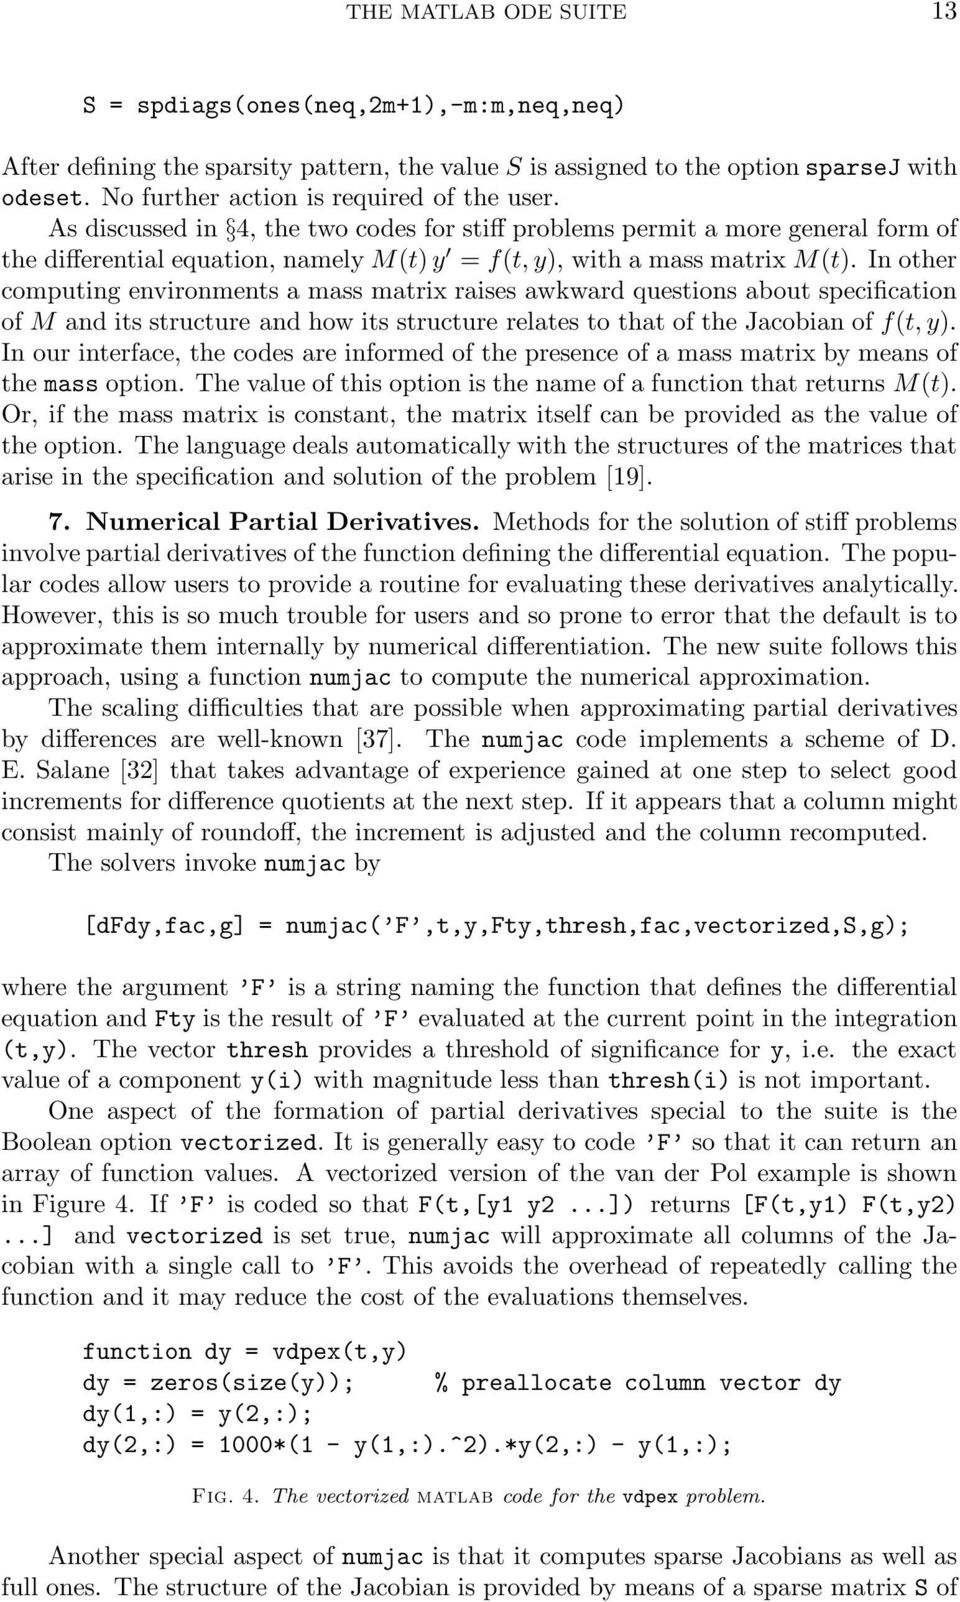 As discussed in 4, the two codes for stiff problems permit a more general form of the differential equation, namely M(t) y = f(t, y), with a mass matrix M(t).